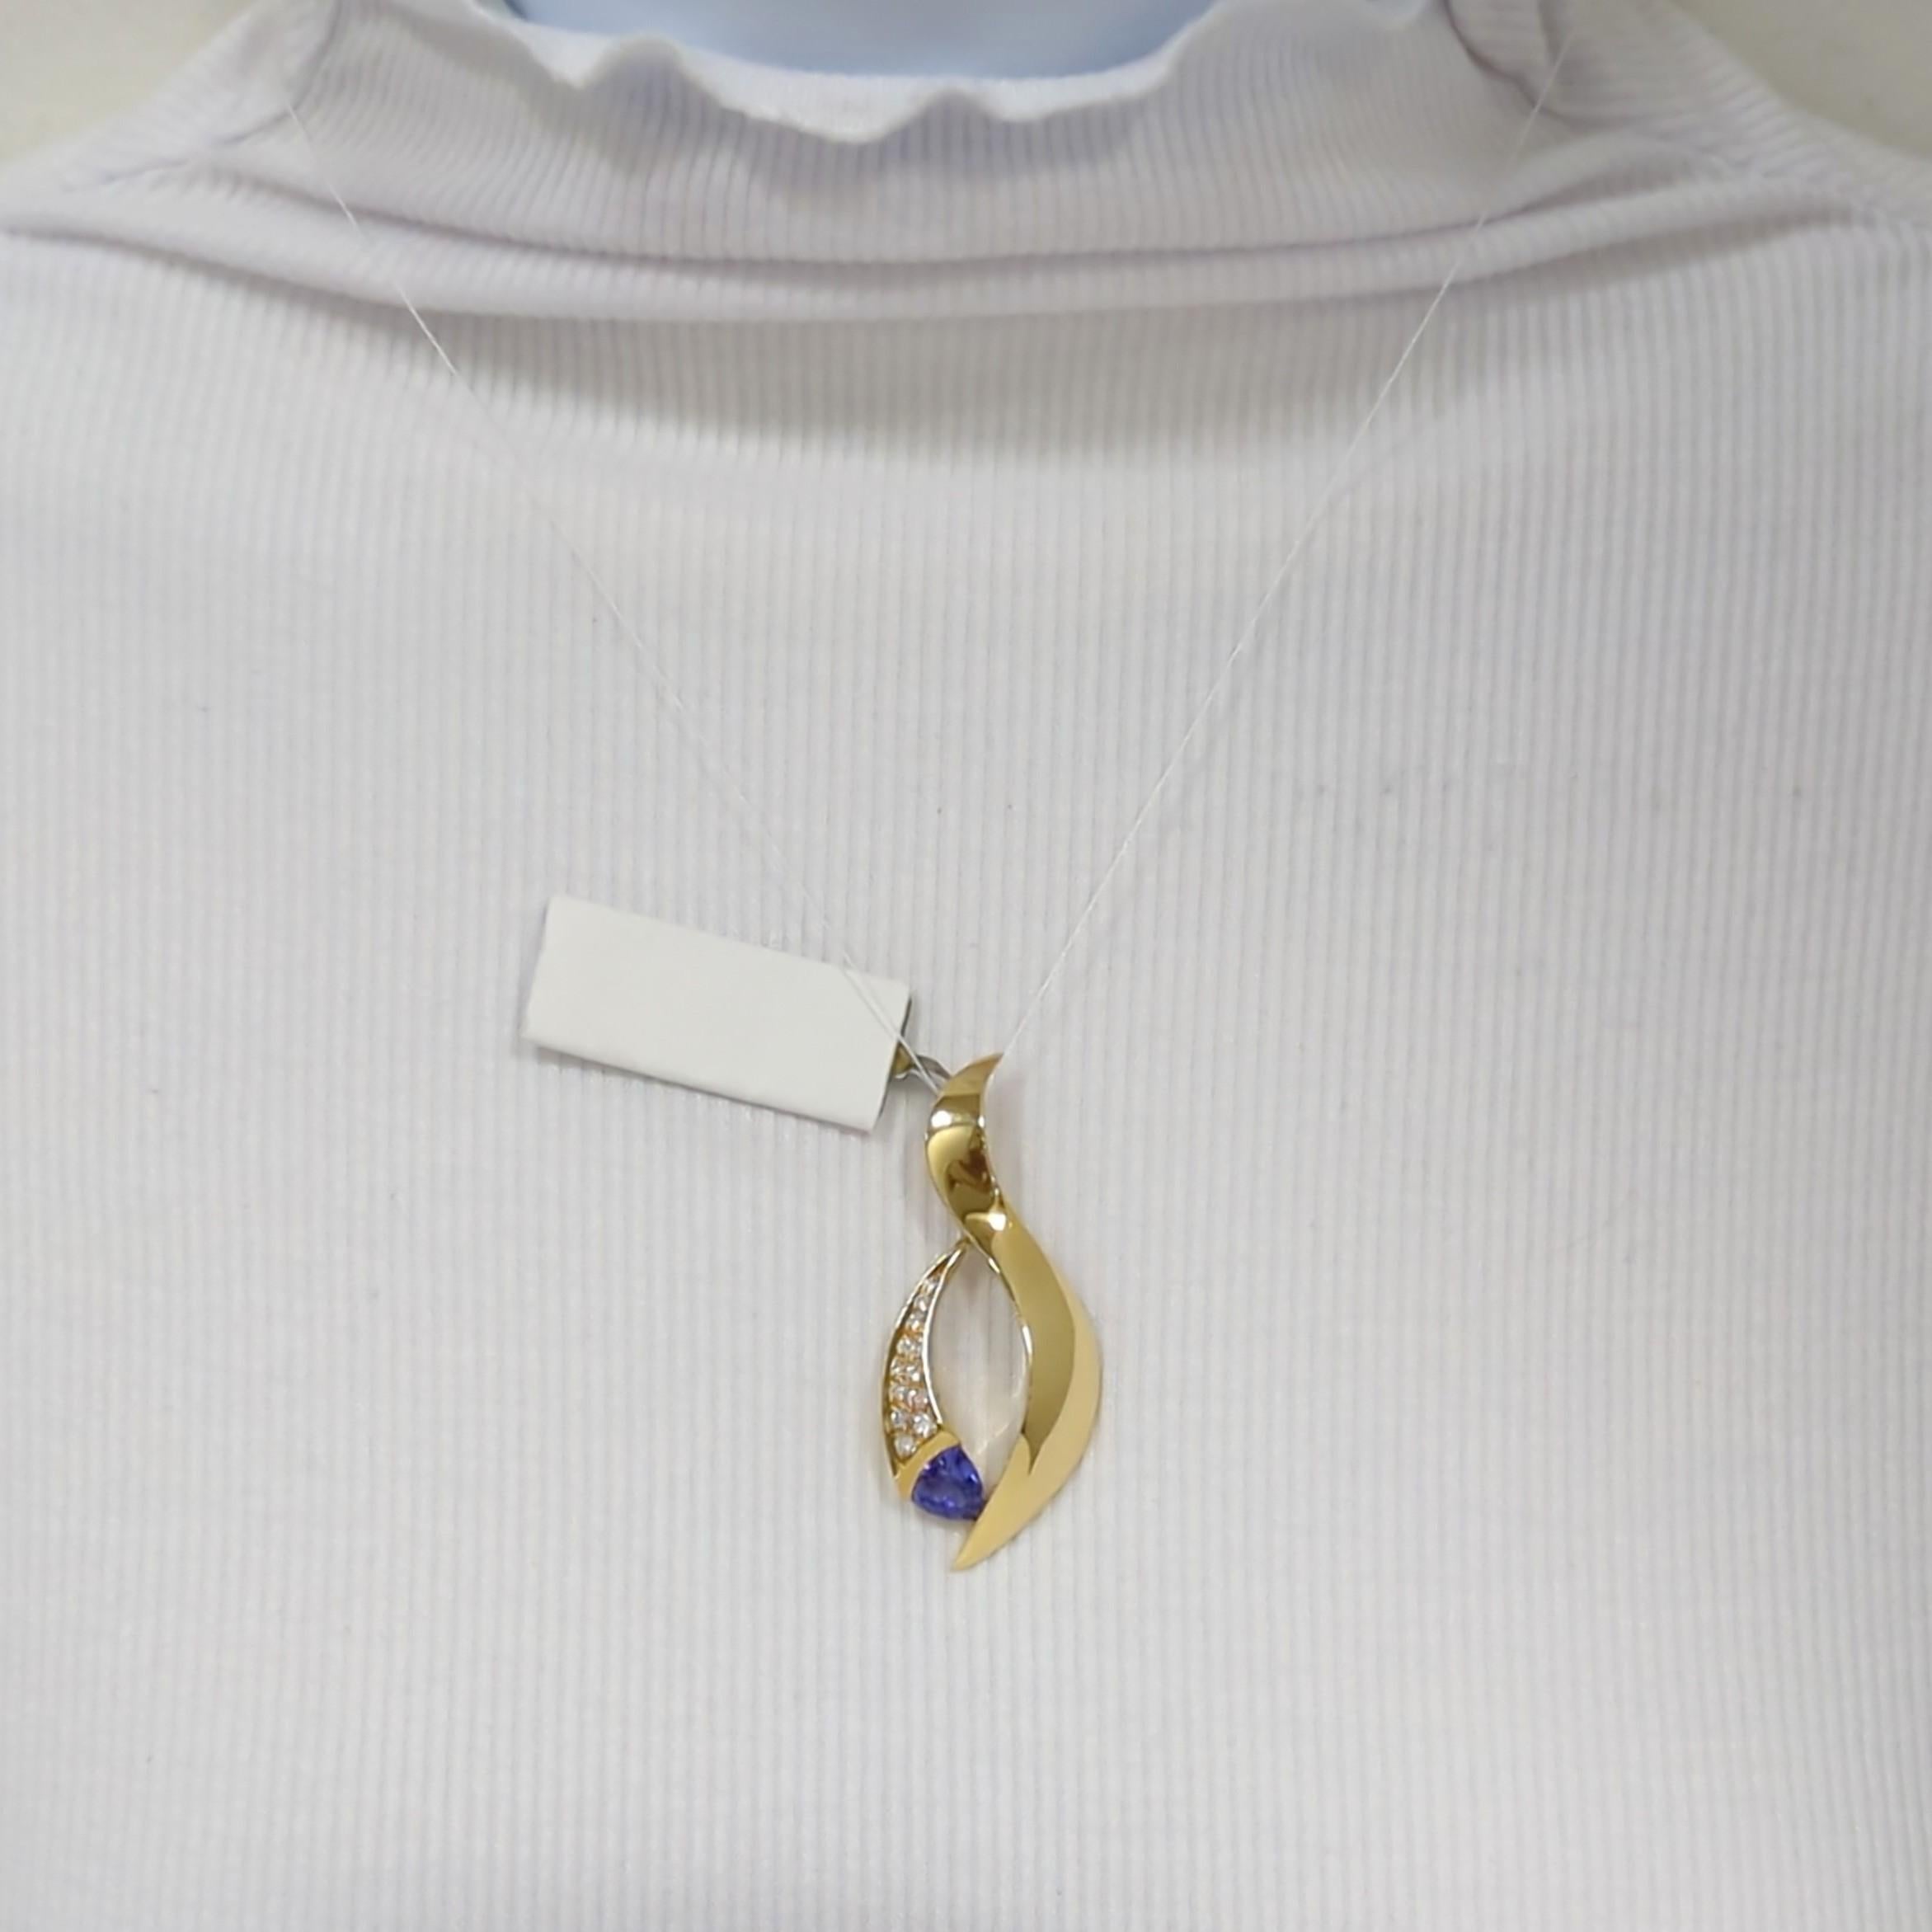 Beautiful pendant with a 0.40 ct. tanzanite trillion and 0.10 ct. white diamond rounds.  Handmade in 18k yellow gold.  Chain can be purchased seperately.